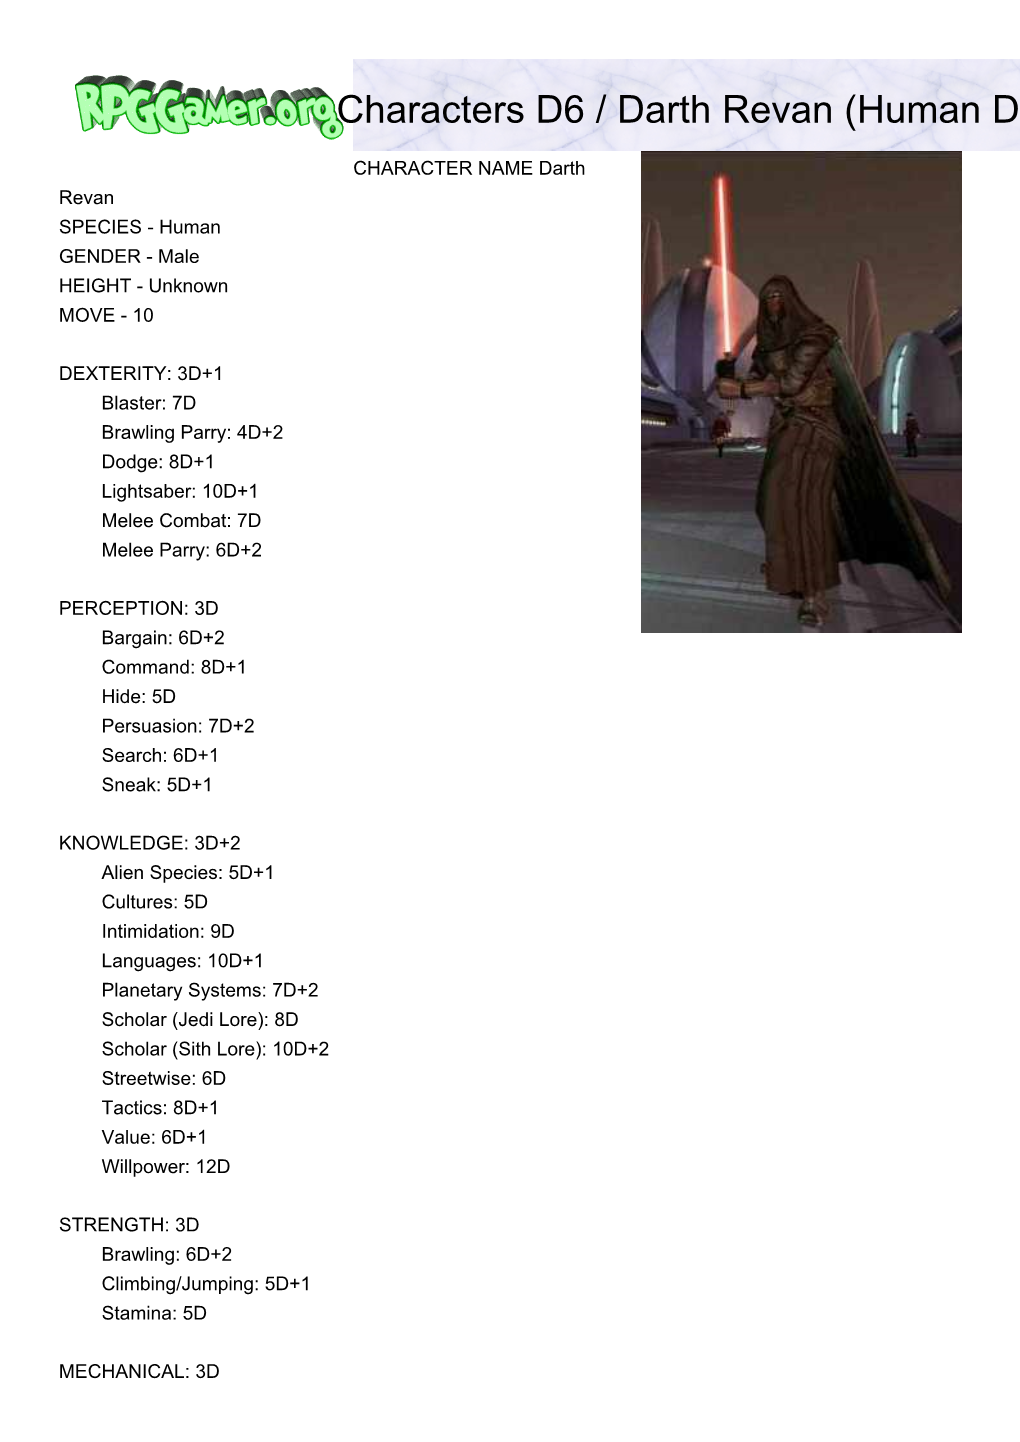 Characters D6 / Darth Revan (Human Dark Lord of the Sith)